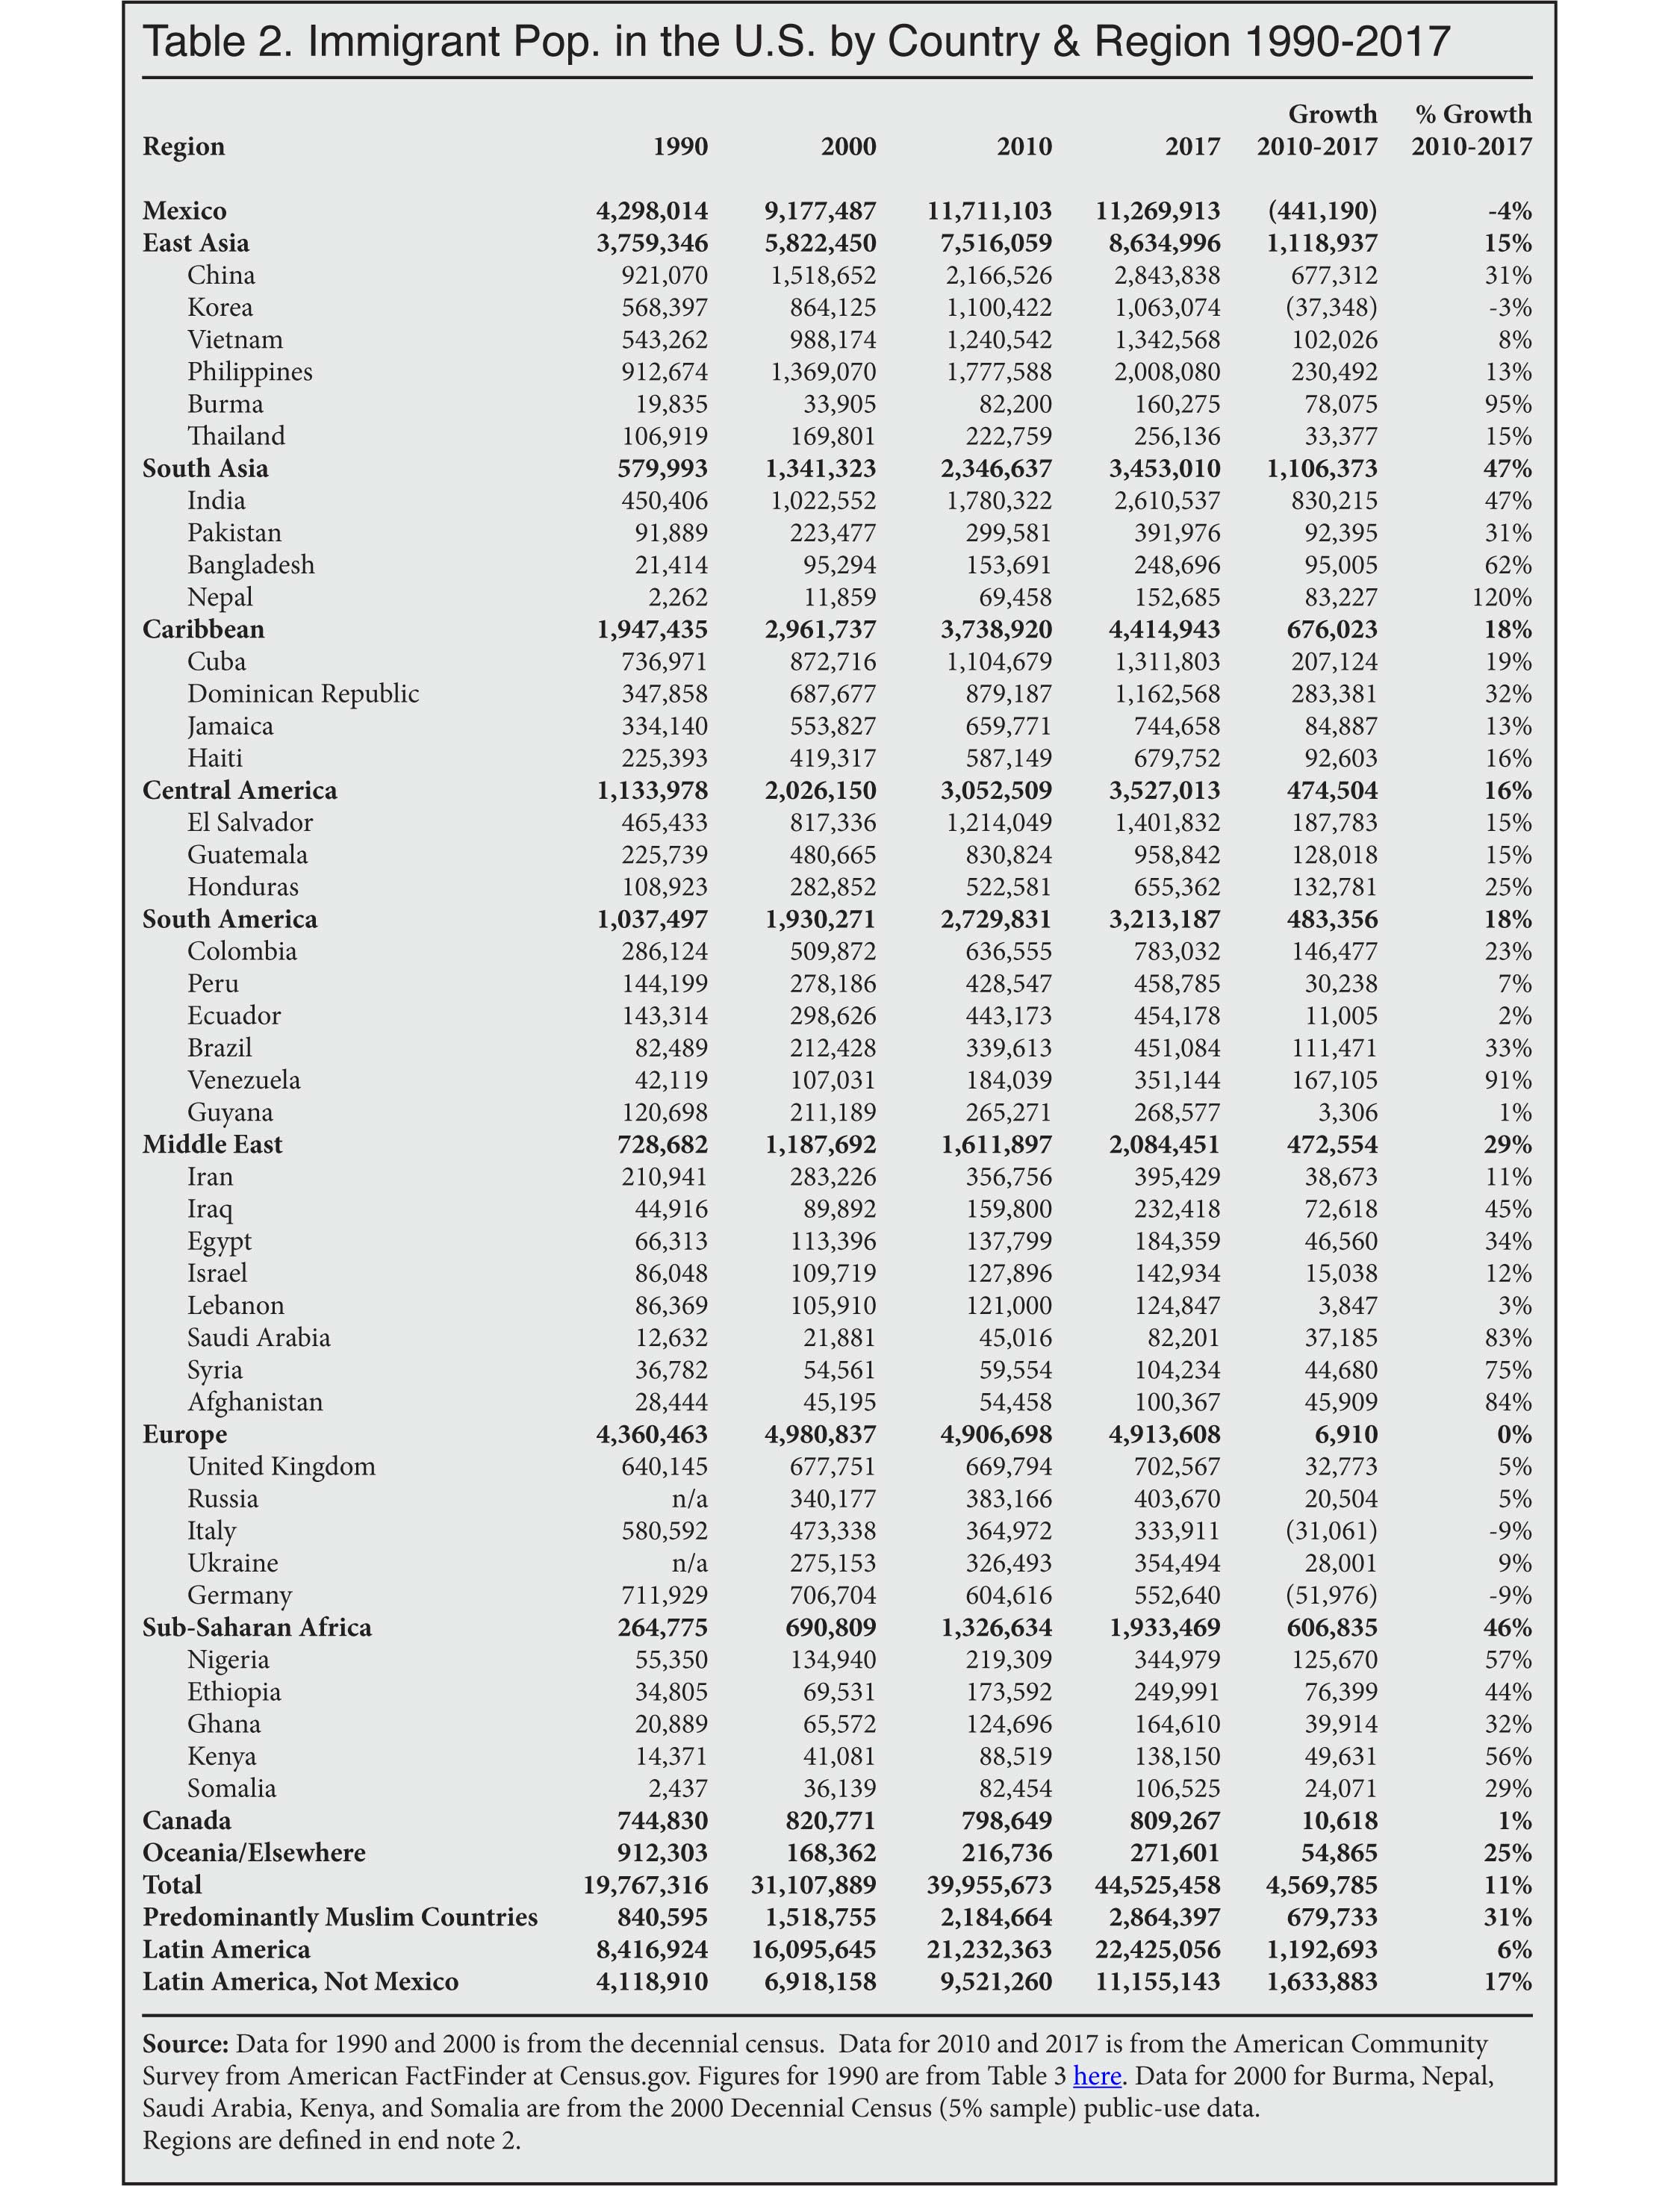 Table: Immigration population in the US by Country and Region, 1990 - 2017